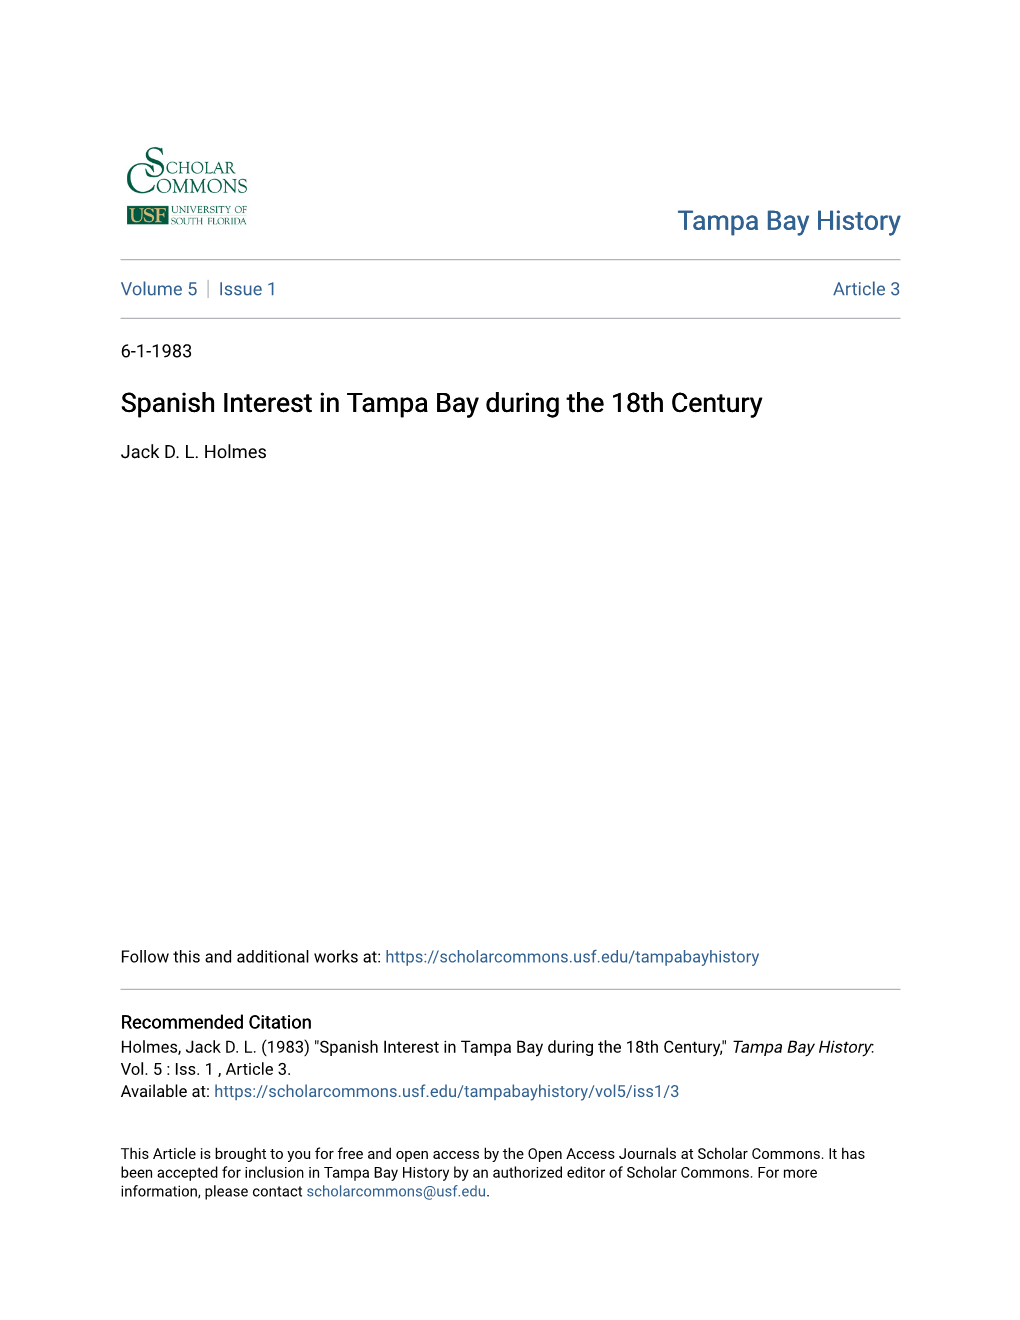 Spanish Interest in Tampa Bay During the 18Th Century